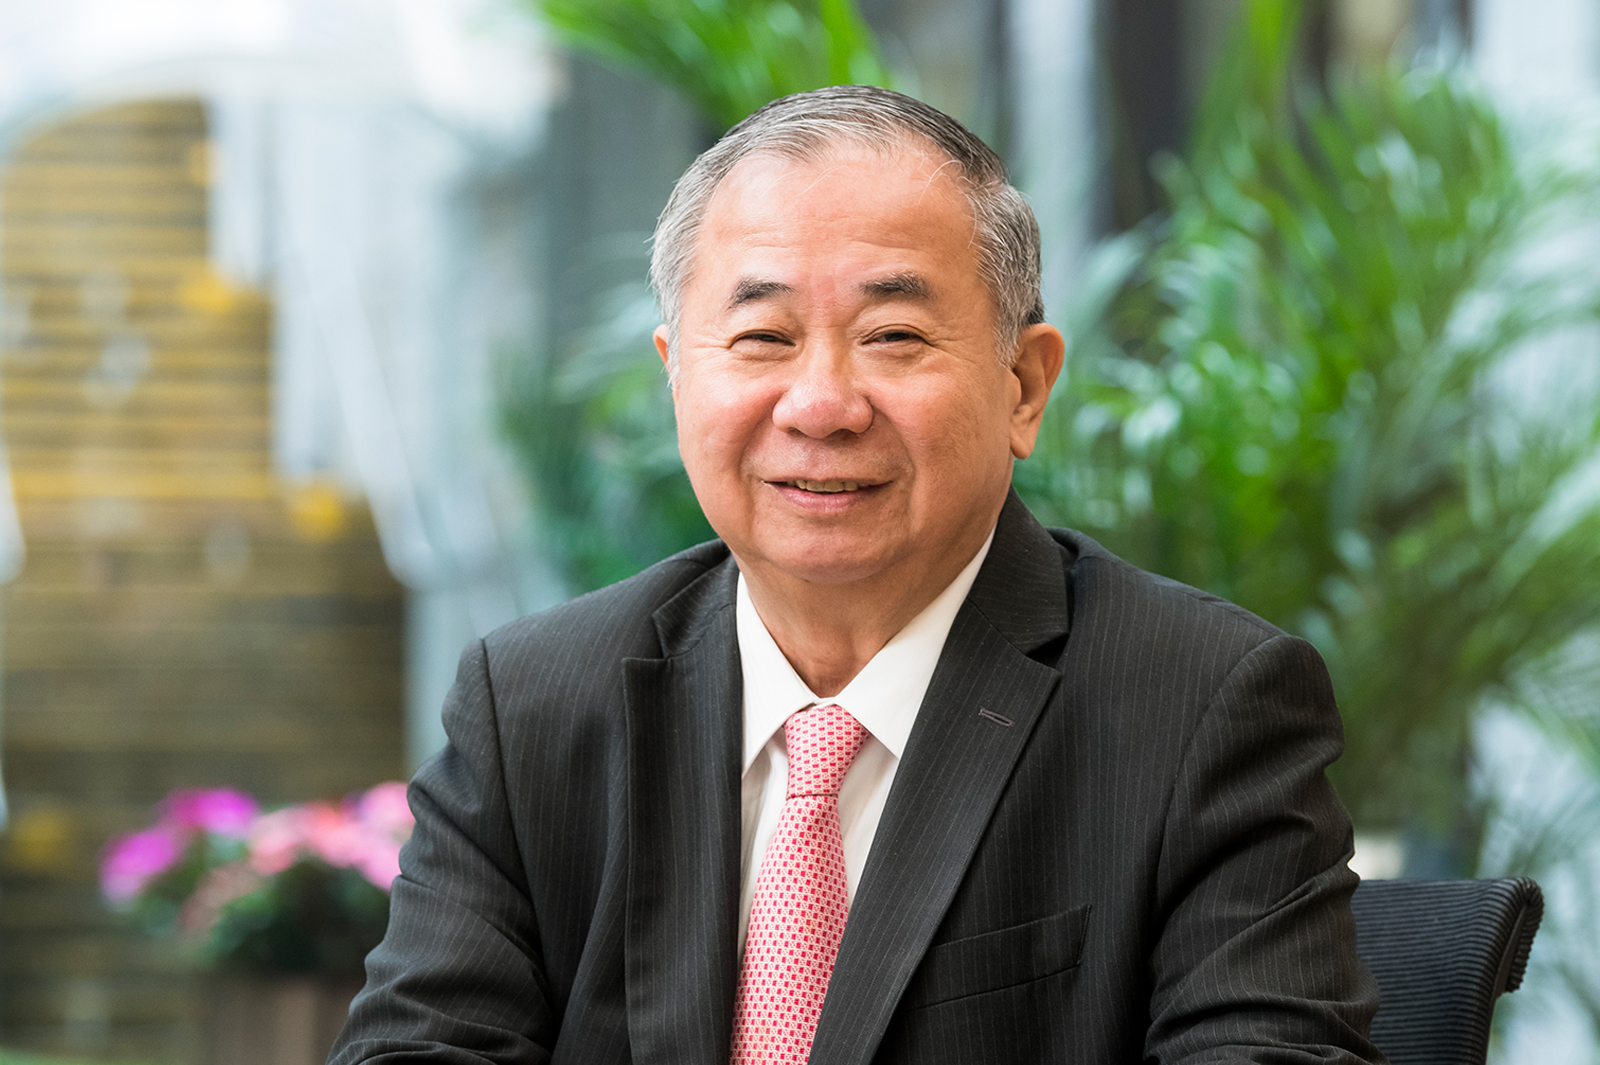 President Boey expressed his hope that faculty and students of CityUHK will collaborate with the Distinguished Visiting Professors to advance pioneering and inspiring projects, innovating into the future.